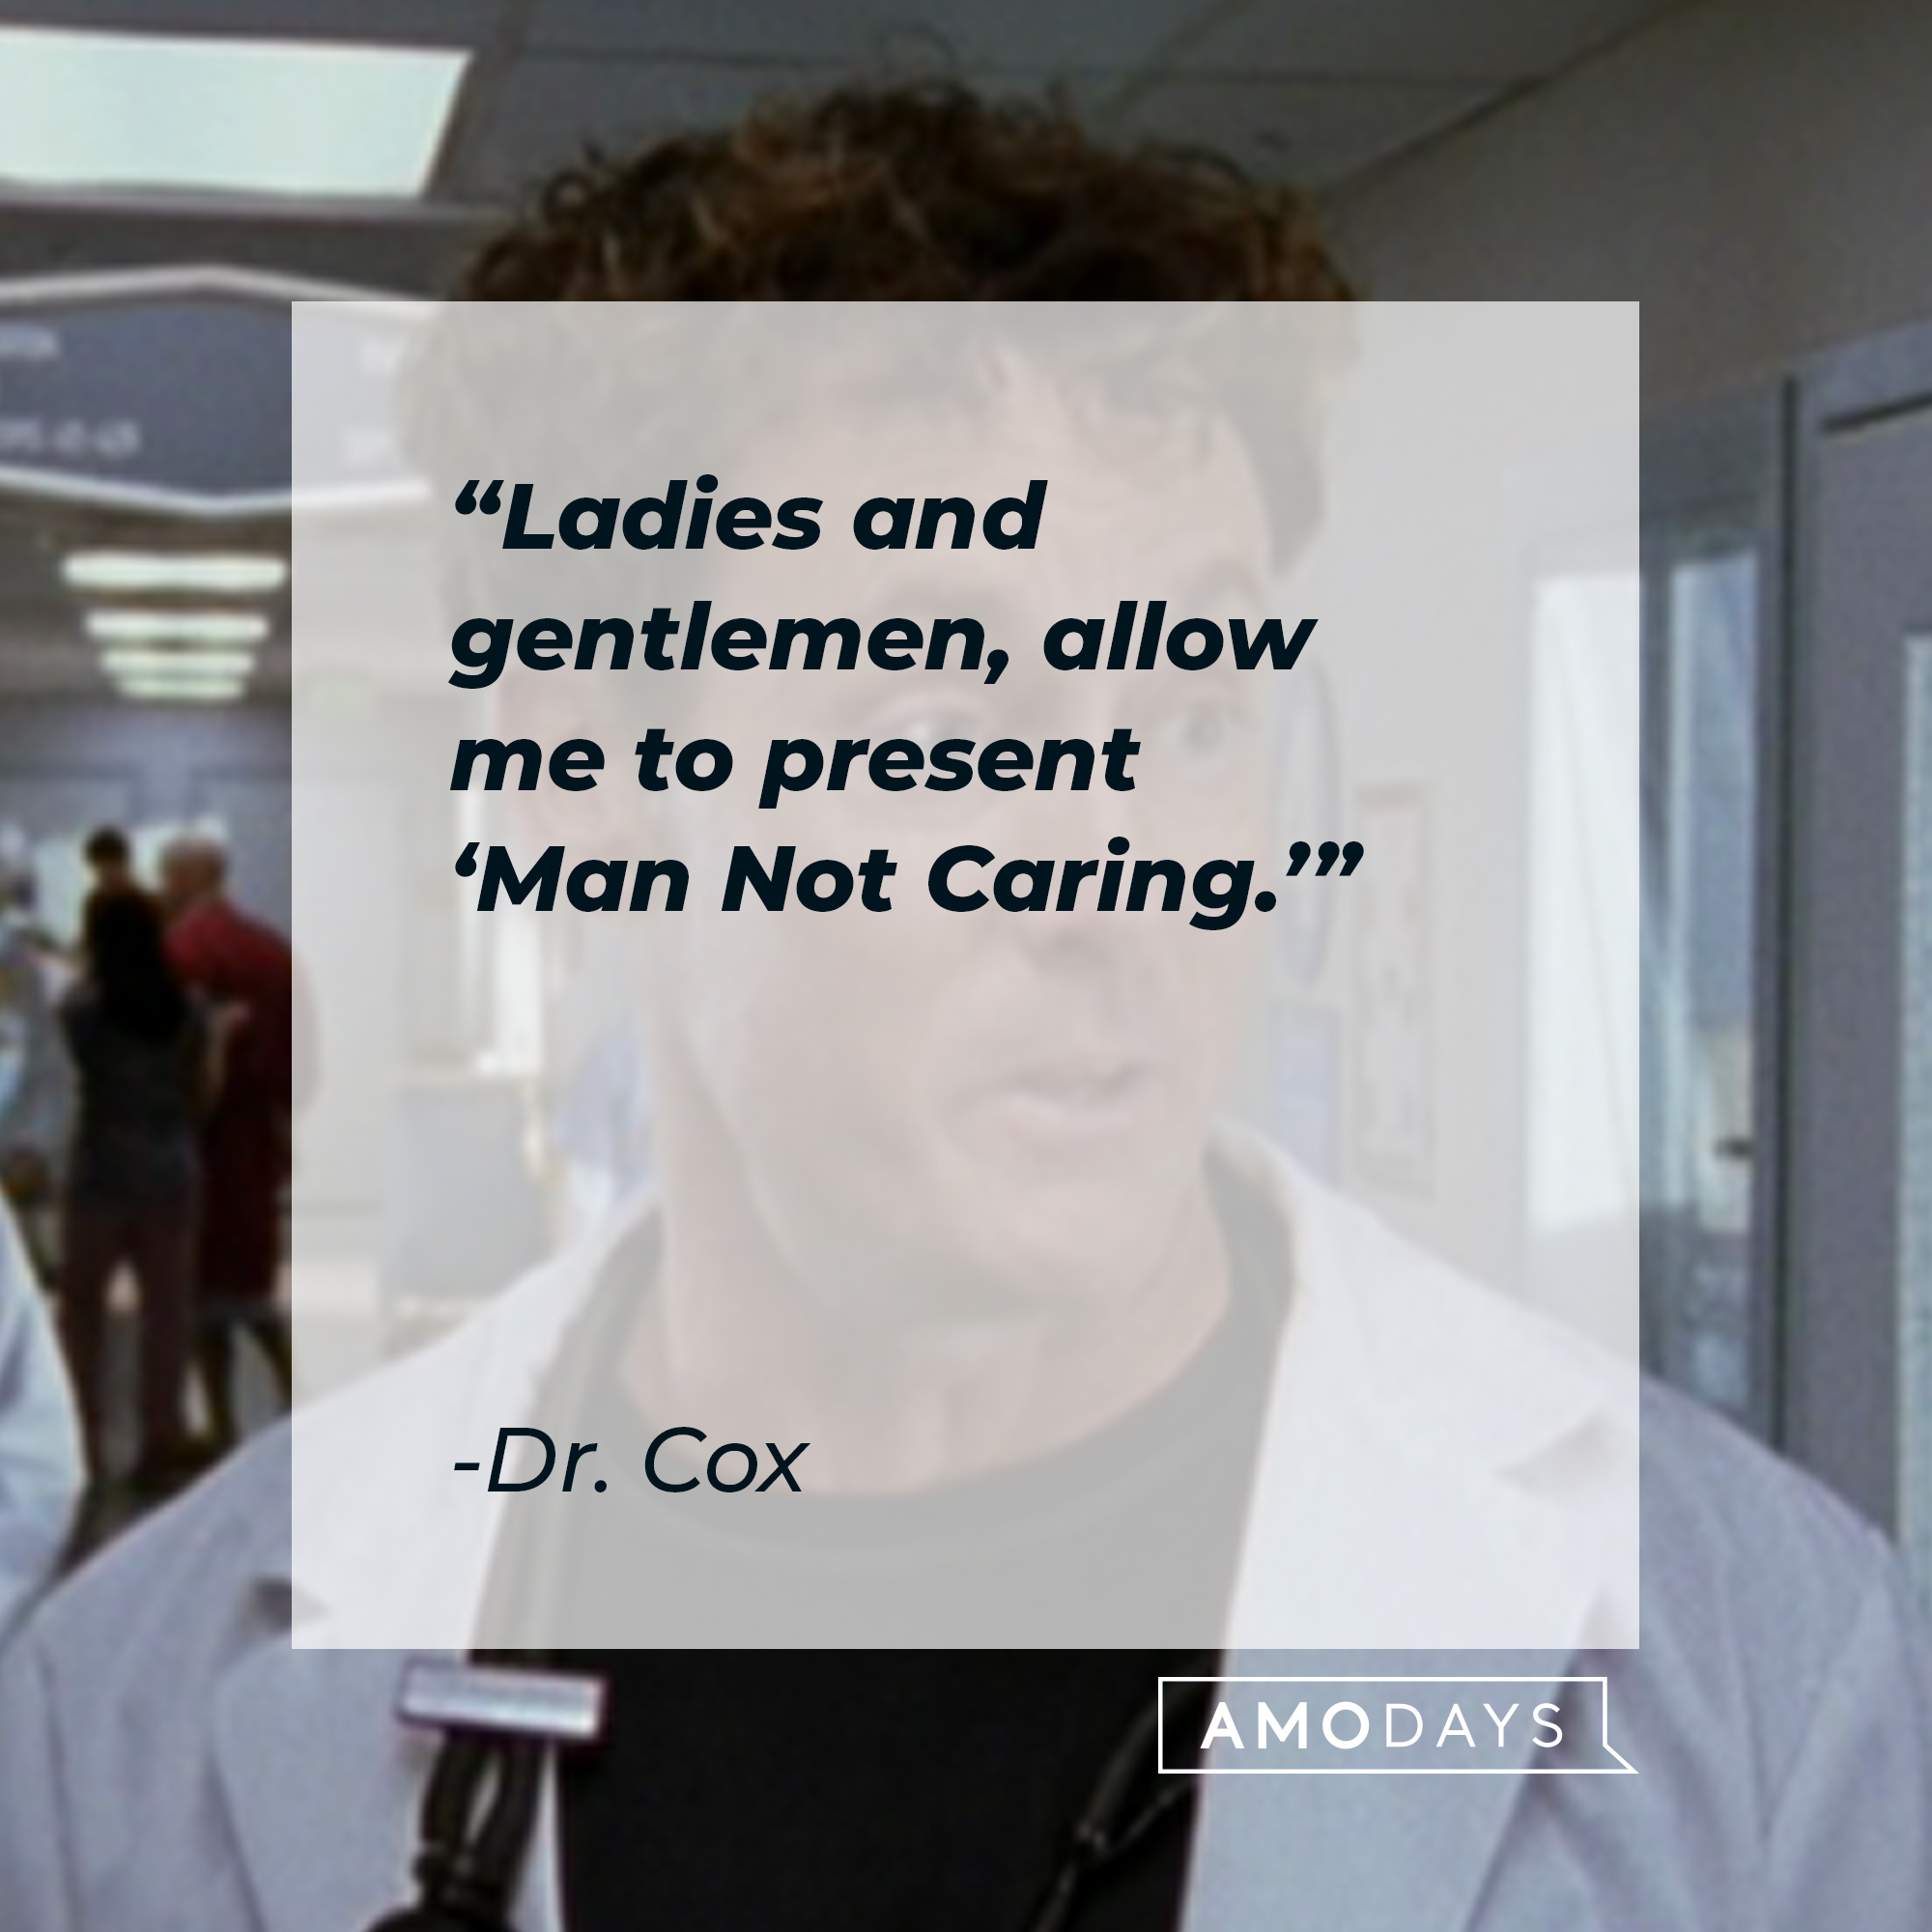 Dr. Cox, with his quote: “Ladies and gentlemen, allow me to present 'Man Not Caring.'” | Source: Facebook.com/scrubs